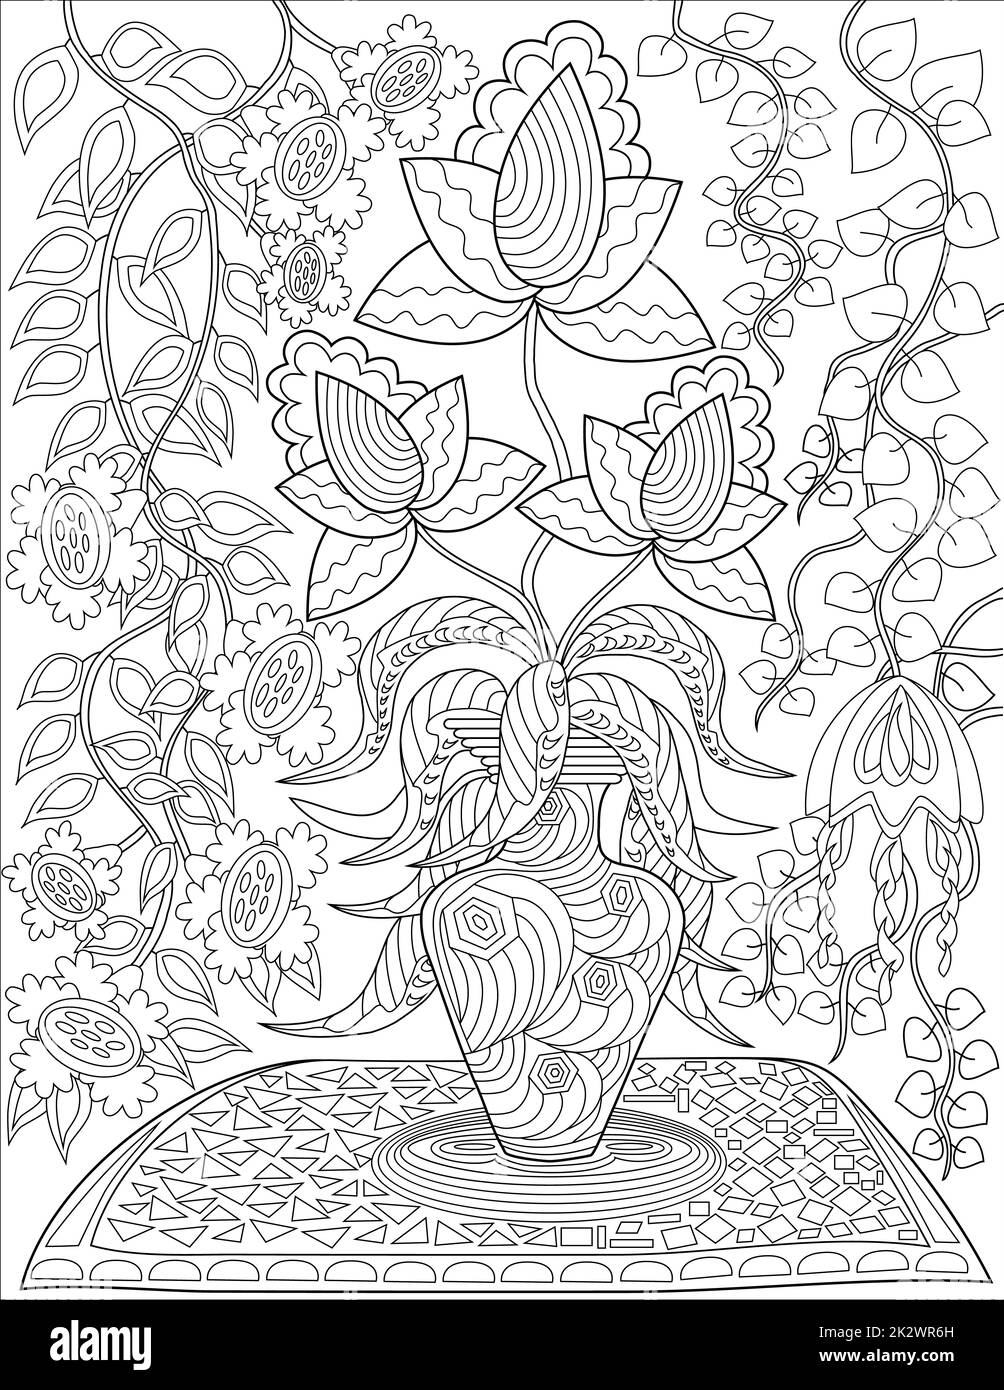 Flower Vase On Table With Roses And Assorted Flowers With Background Wall Paper Flowers Line Drawing Coloring Book Stock Photo